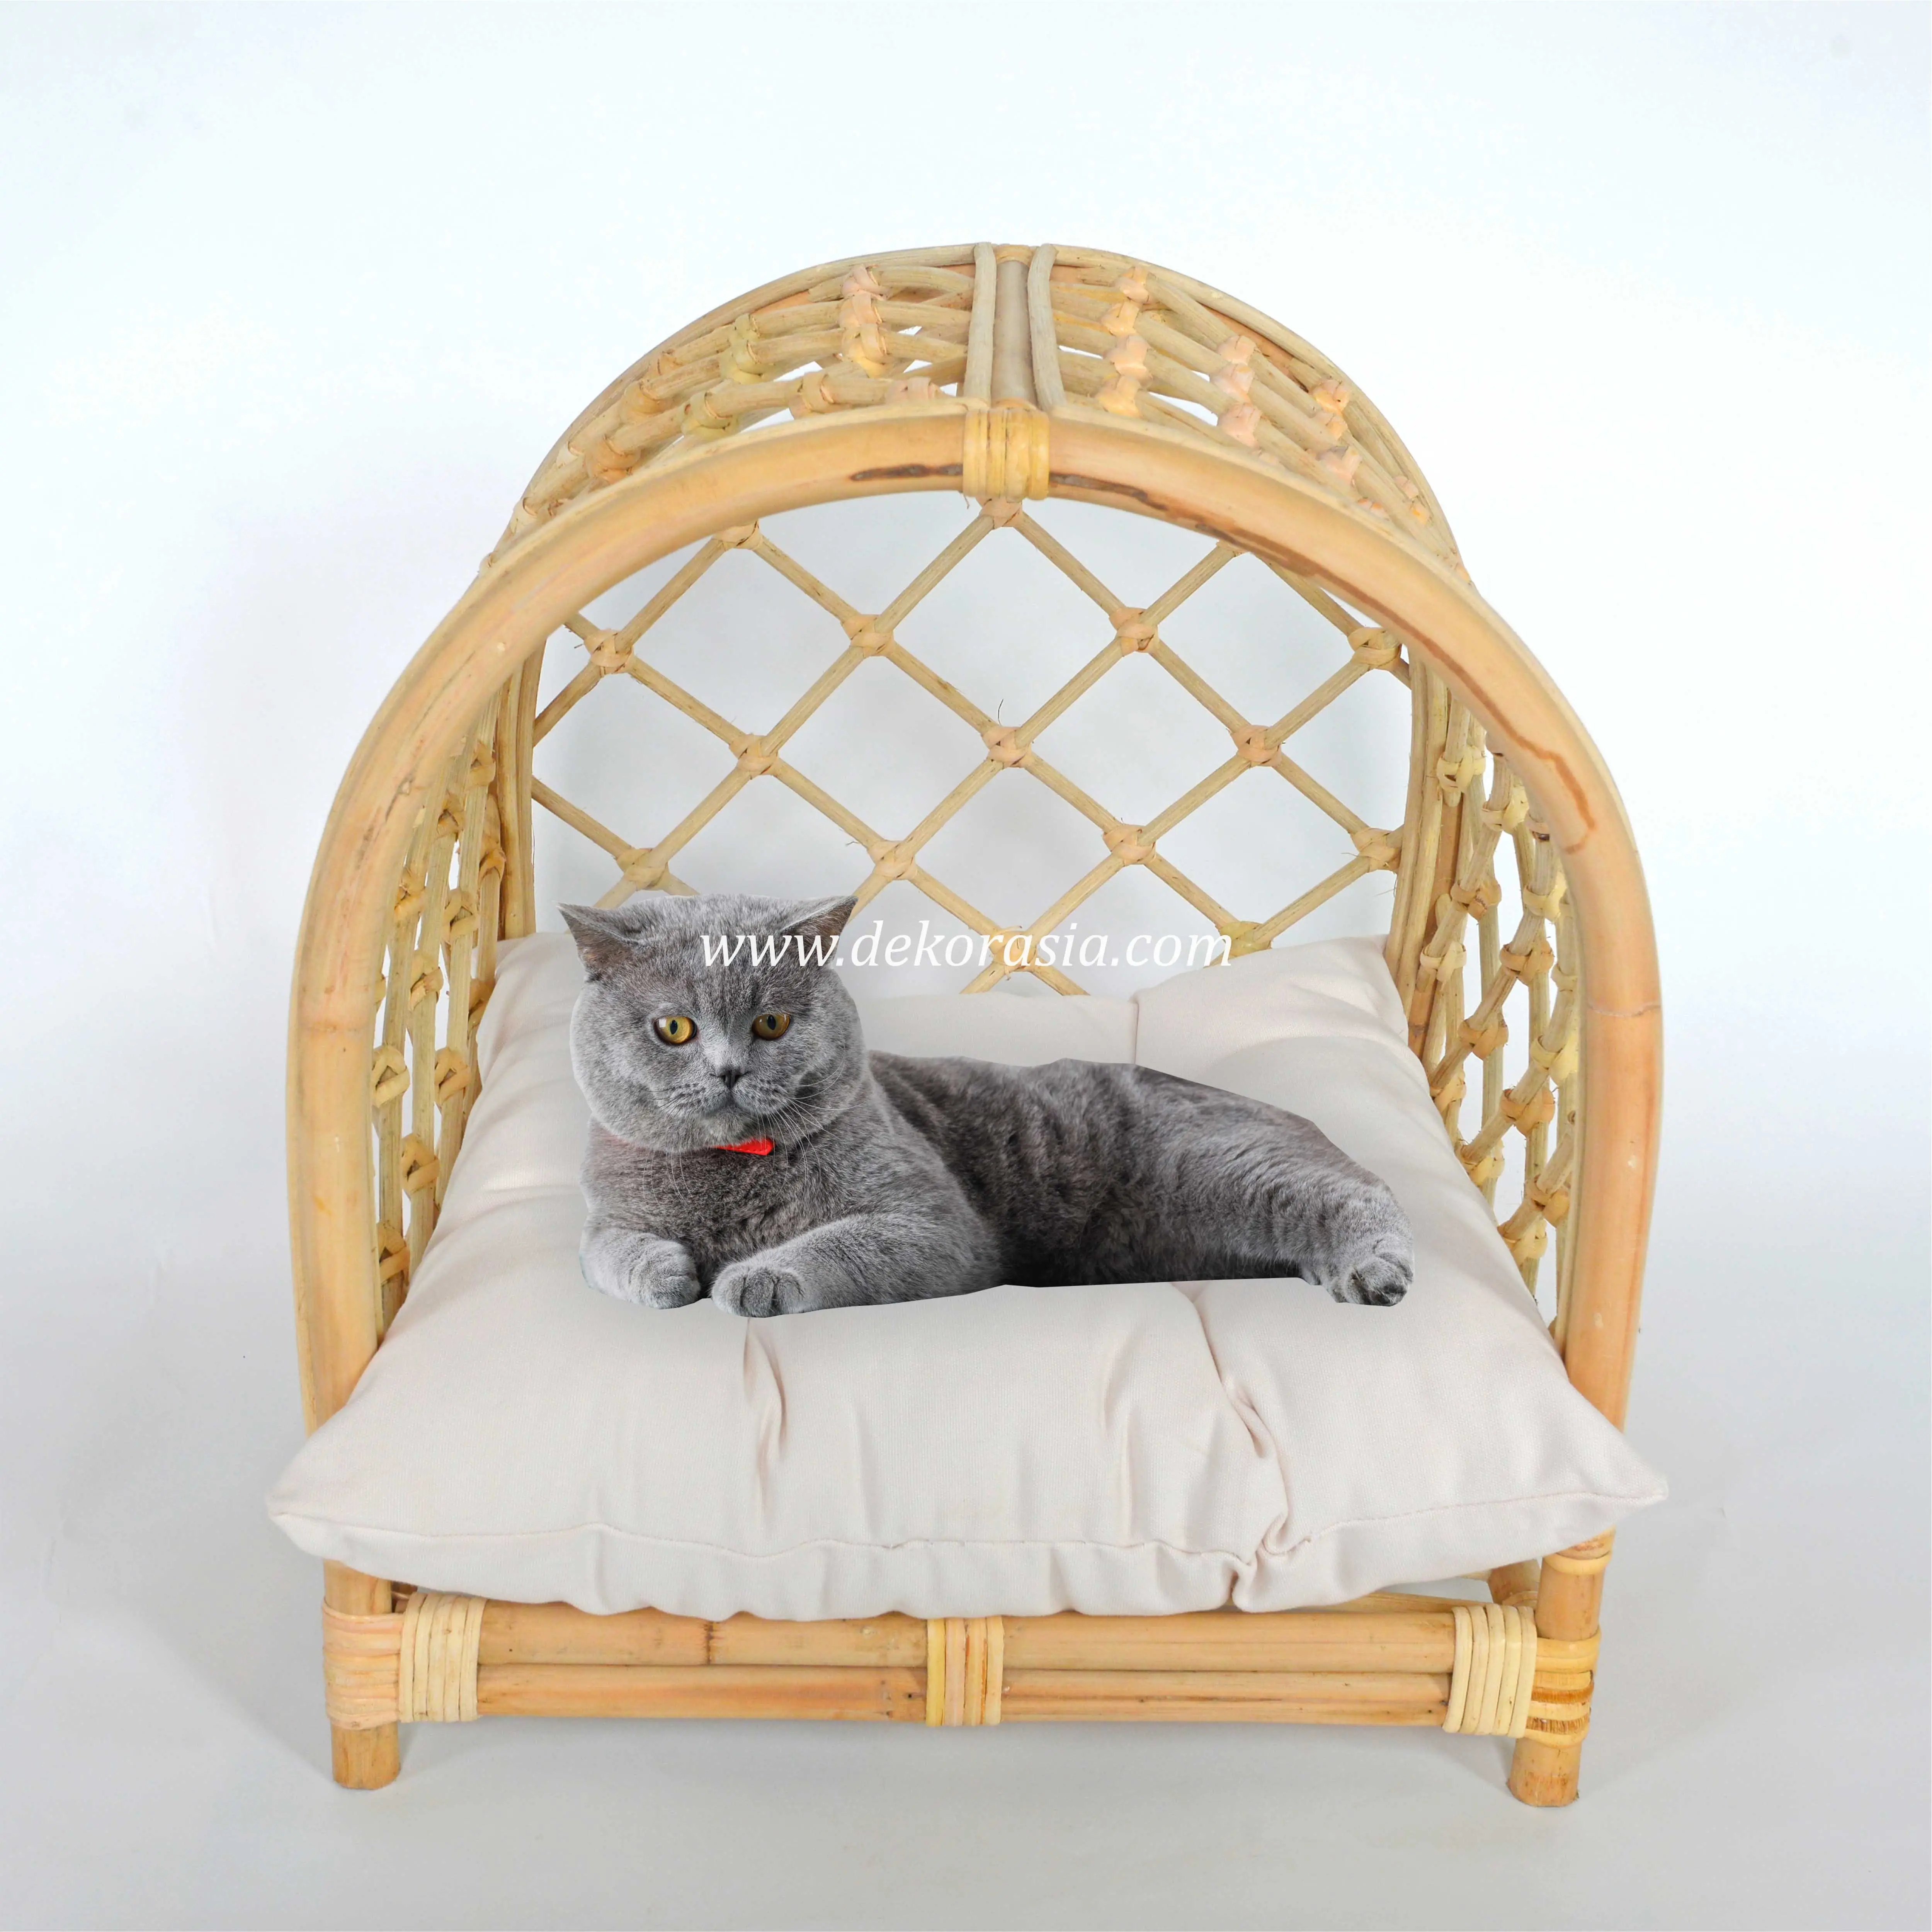 Rattan Pet Bed Cat Dog Cushion Pet Beds, Soft and Comfortable for Pets Luxury Pet Bed, Sofa Beds Pet Cages & Houses Animal Cages